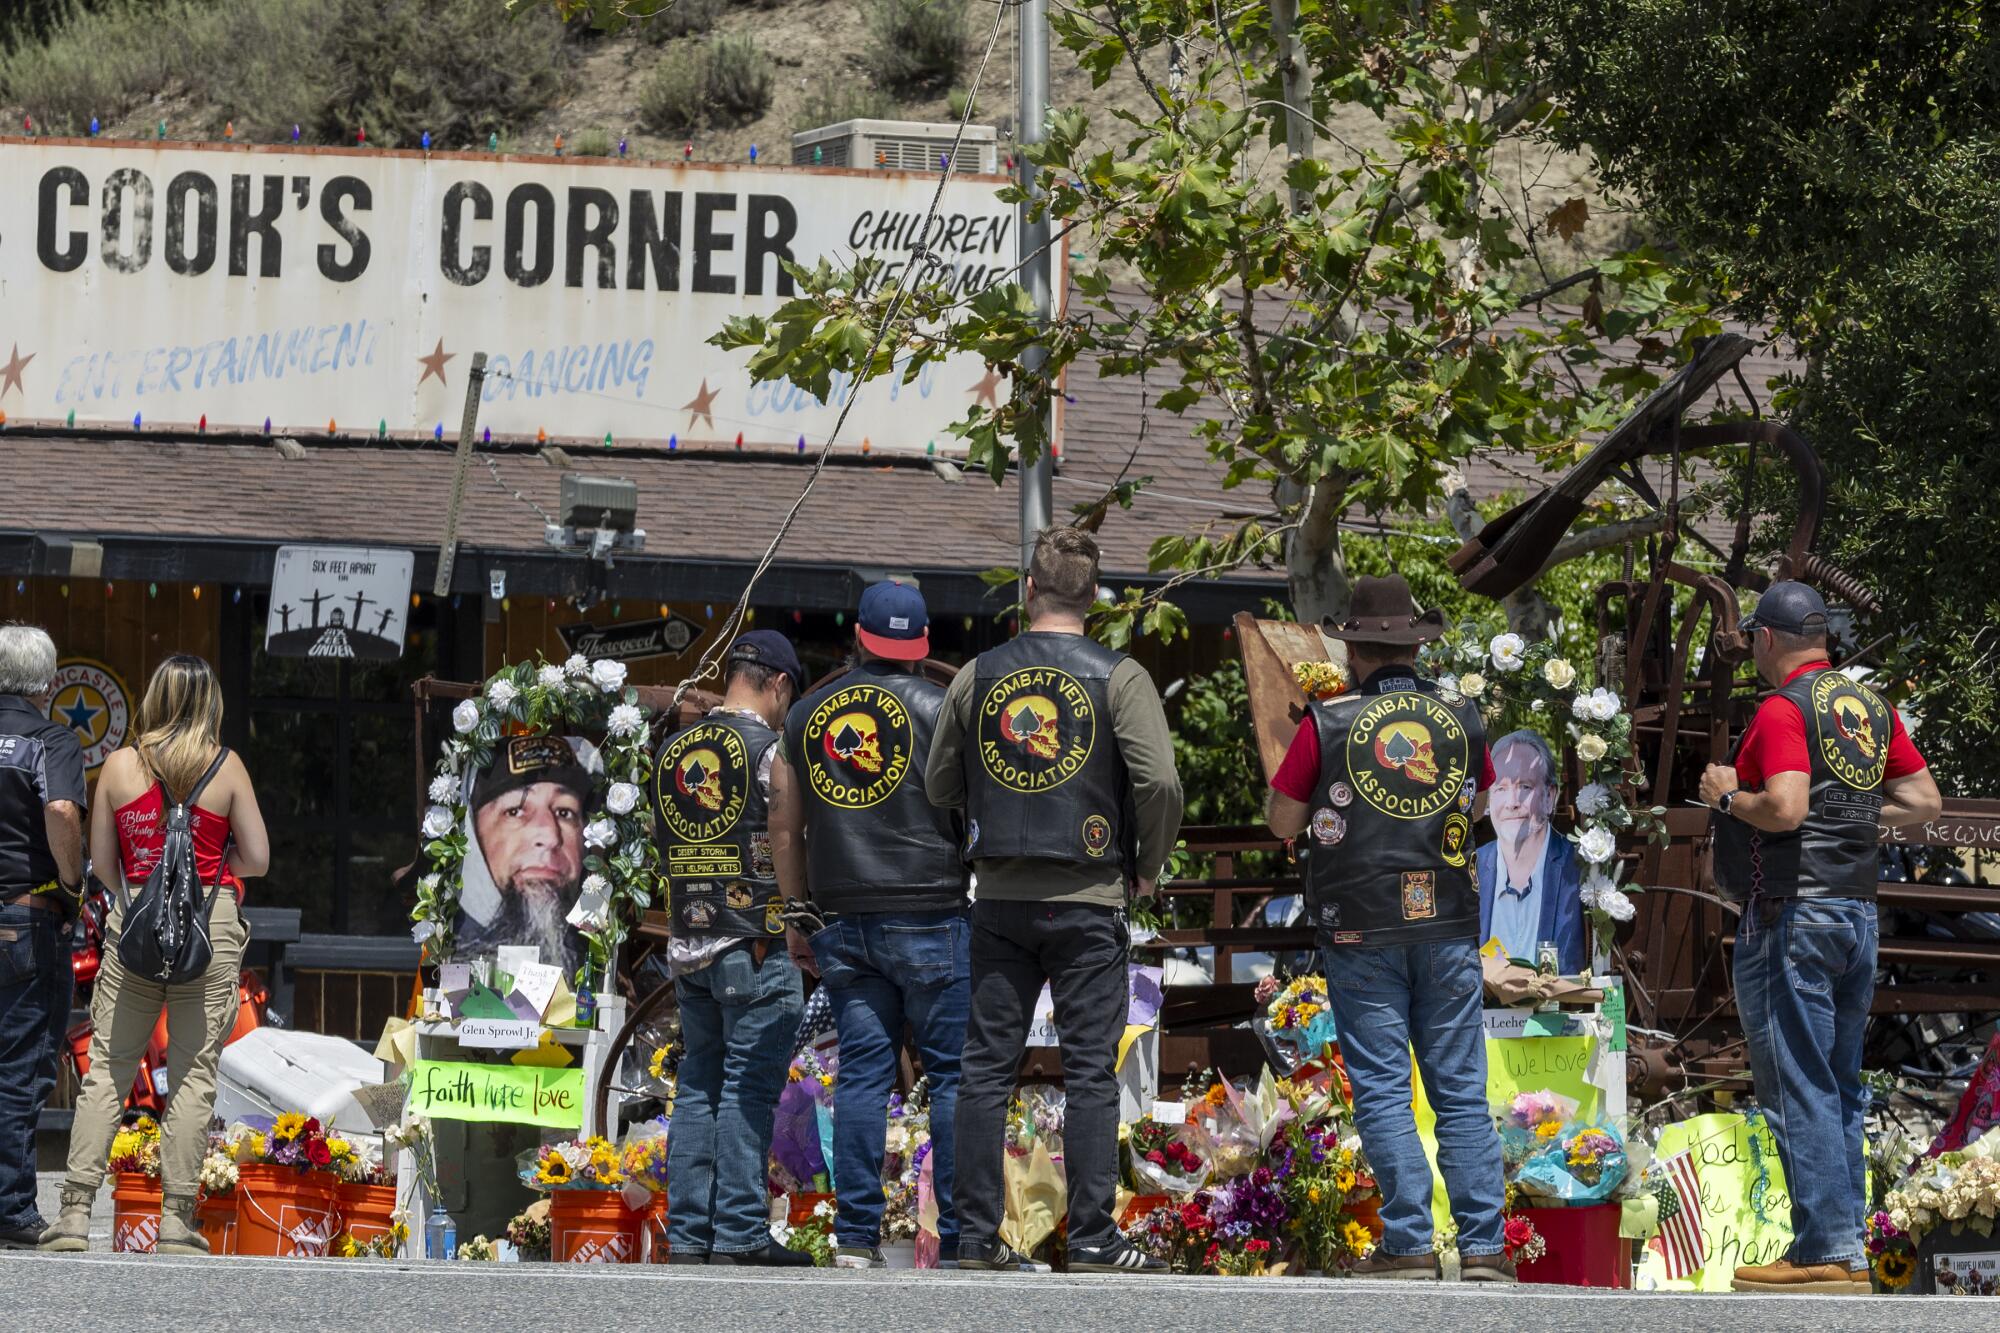 Members of the Combat Veterans Assn. motorcycle club view a growing memorial to victims.